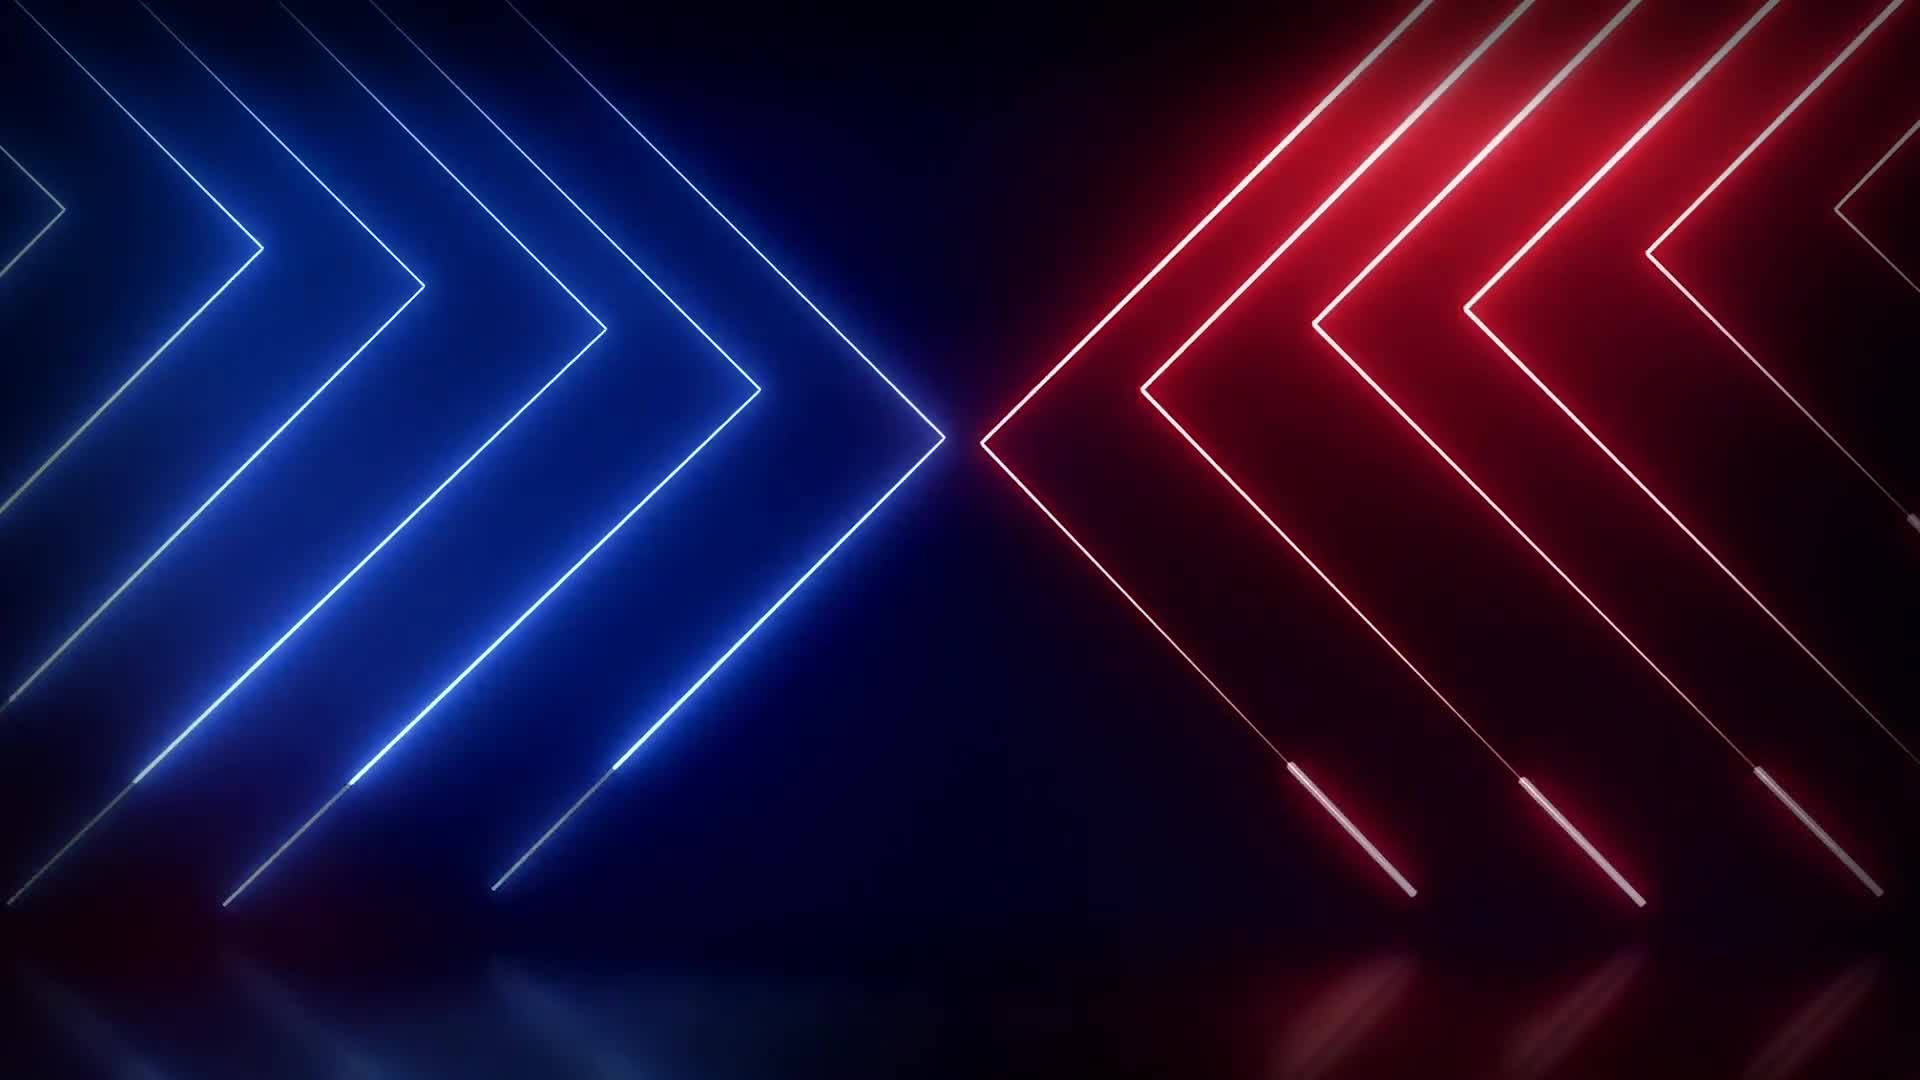 Red And Blue Triangle Neon Lights Wallpaper